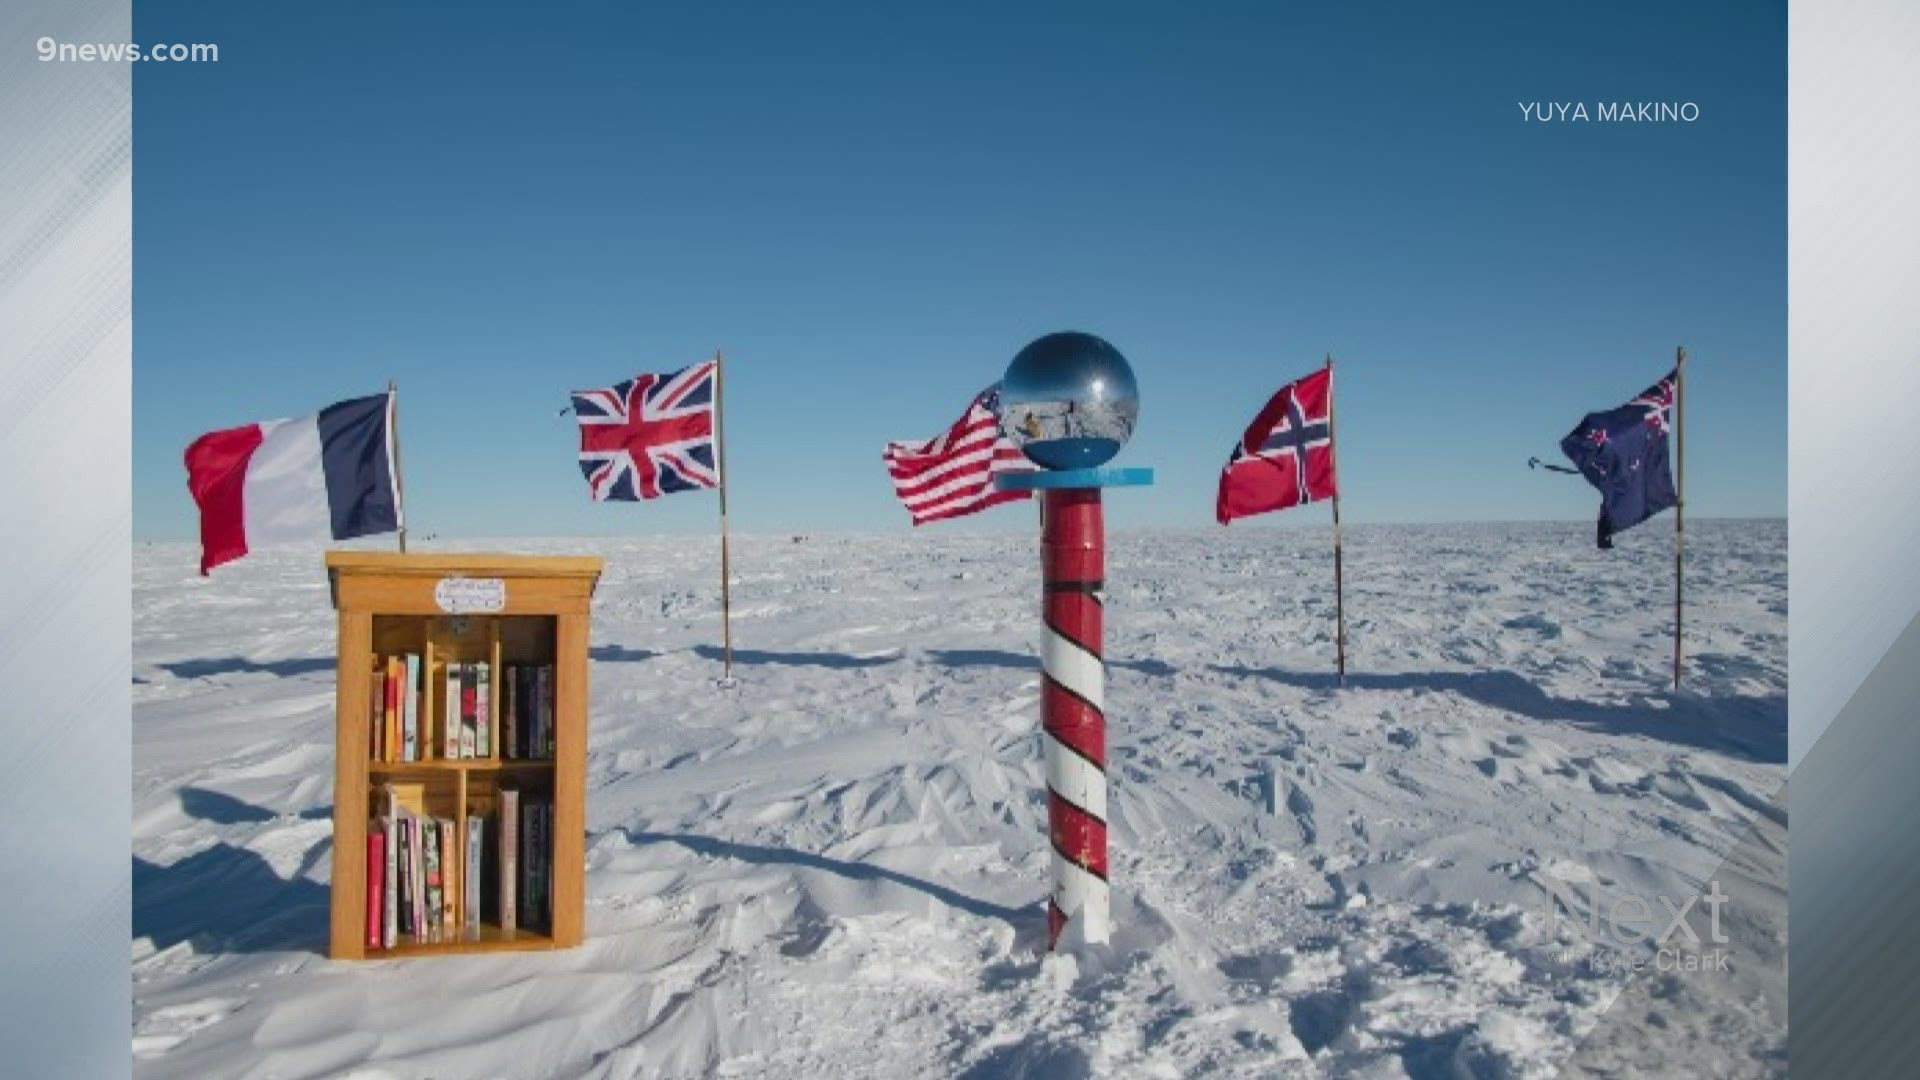 The South Pole received a gift of knowledge from Coloradan Dr. Russell Schnell in the form of a Little Free Library.